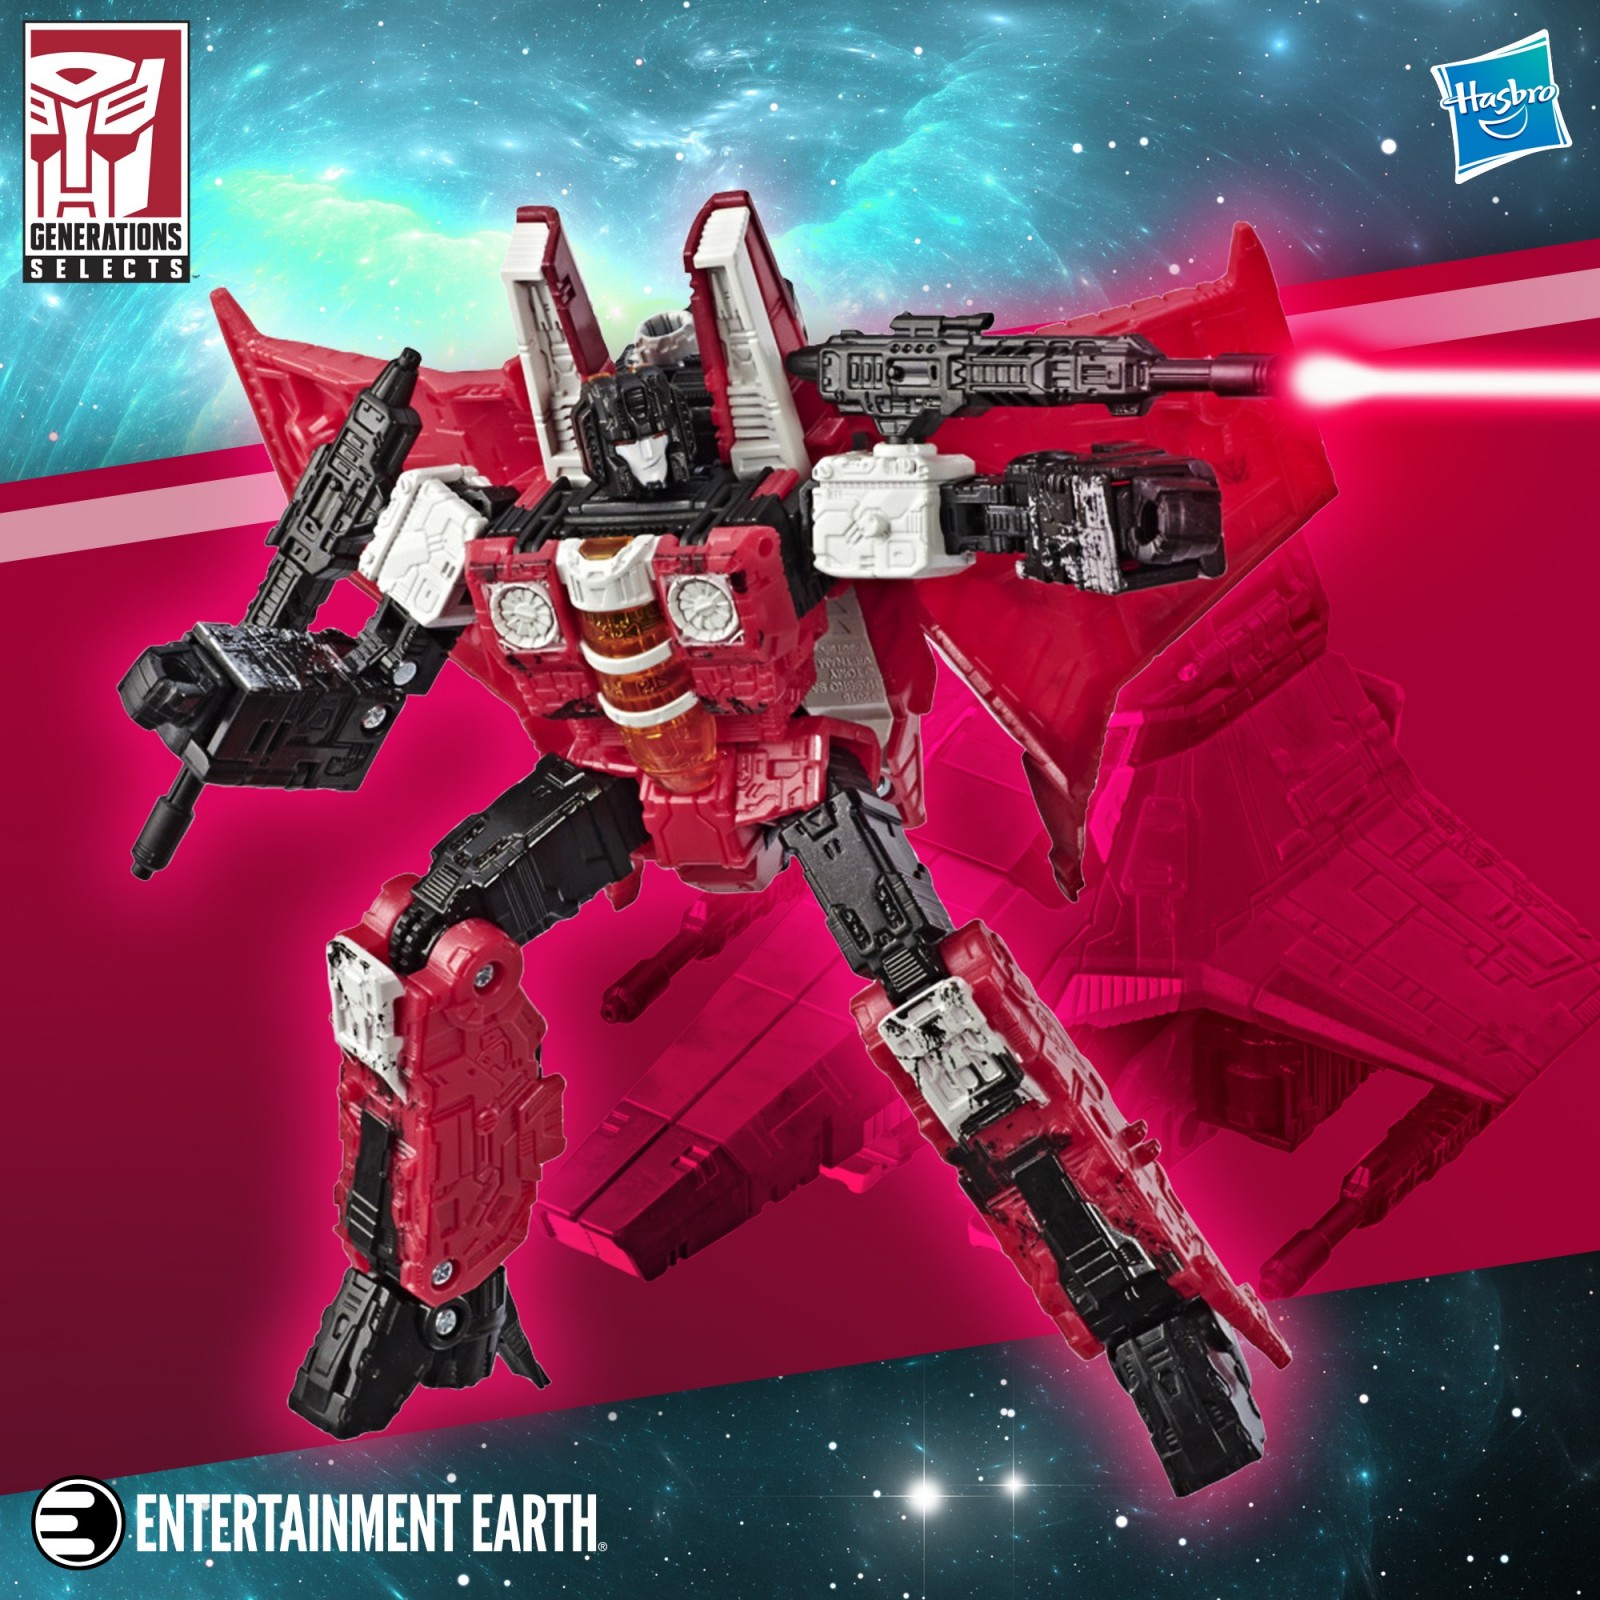 Transformers News: Generations Selects Spinout and Cordon, Studio Series 48 Megatron and more from Entertainment Earth